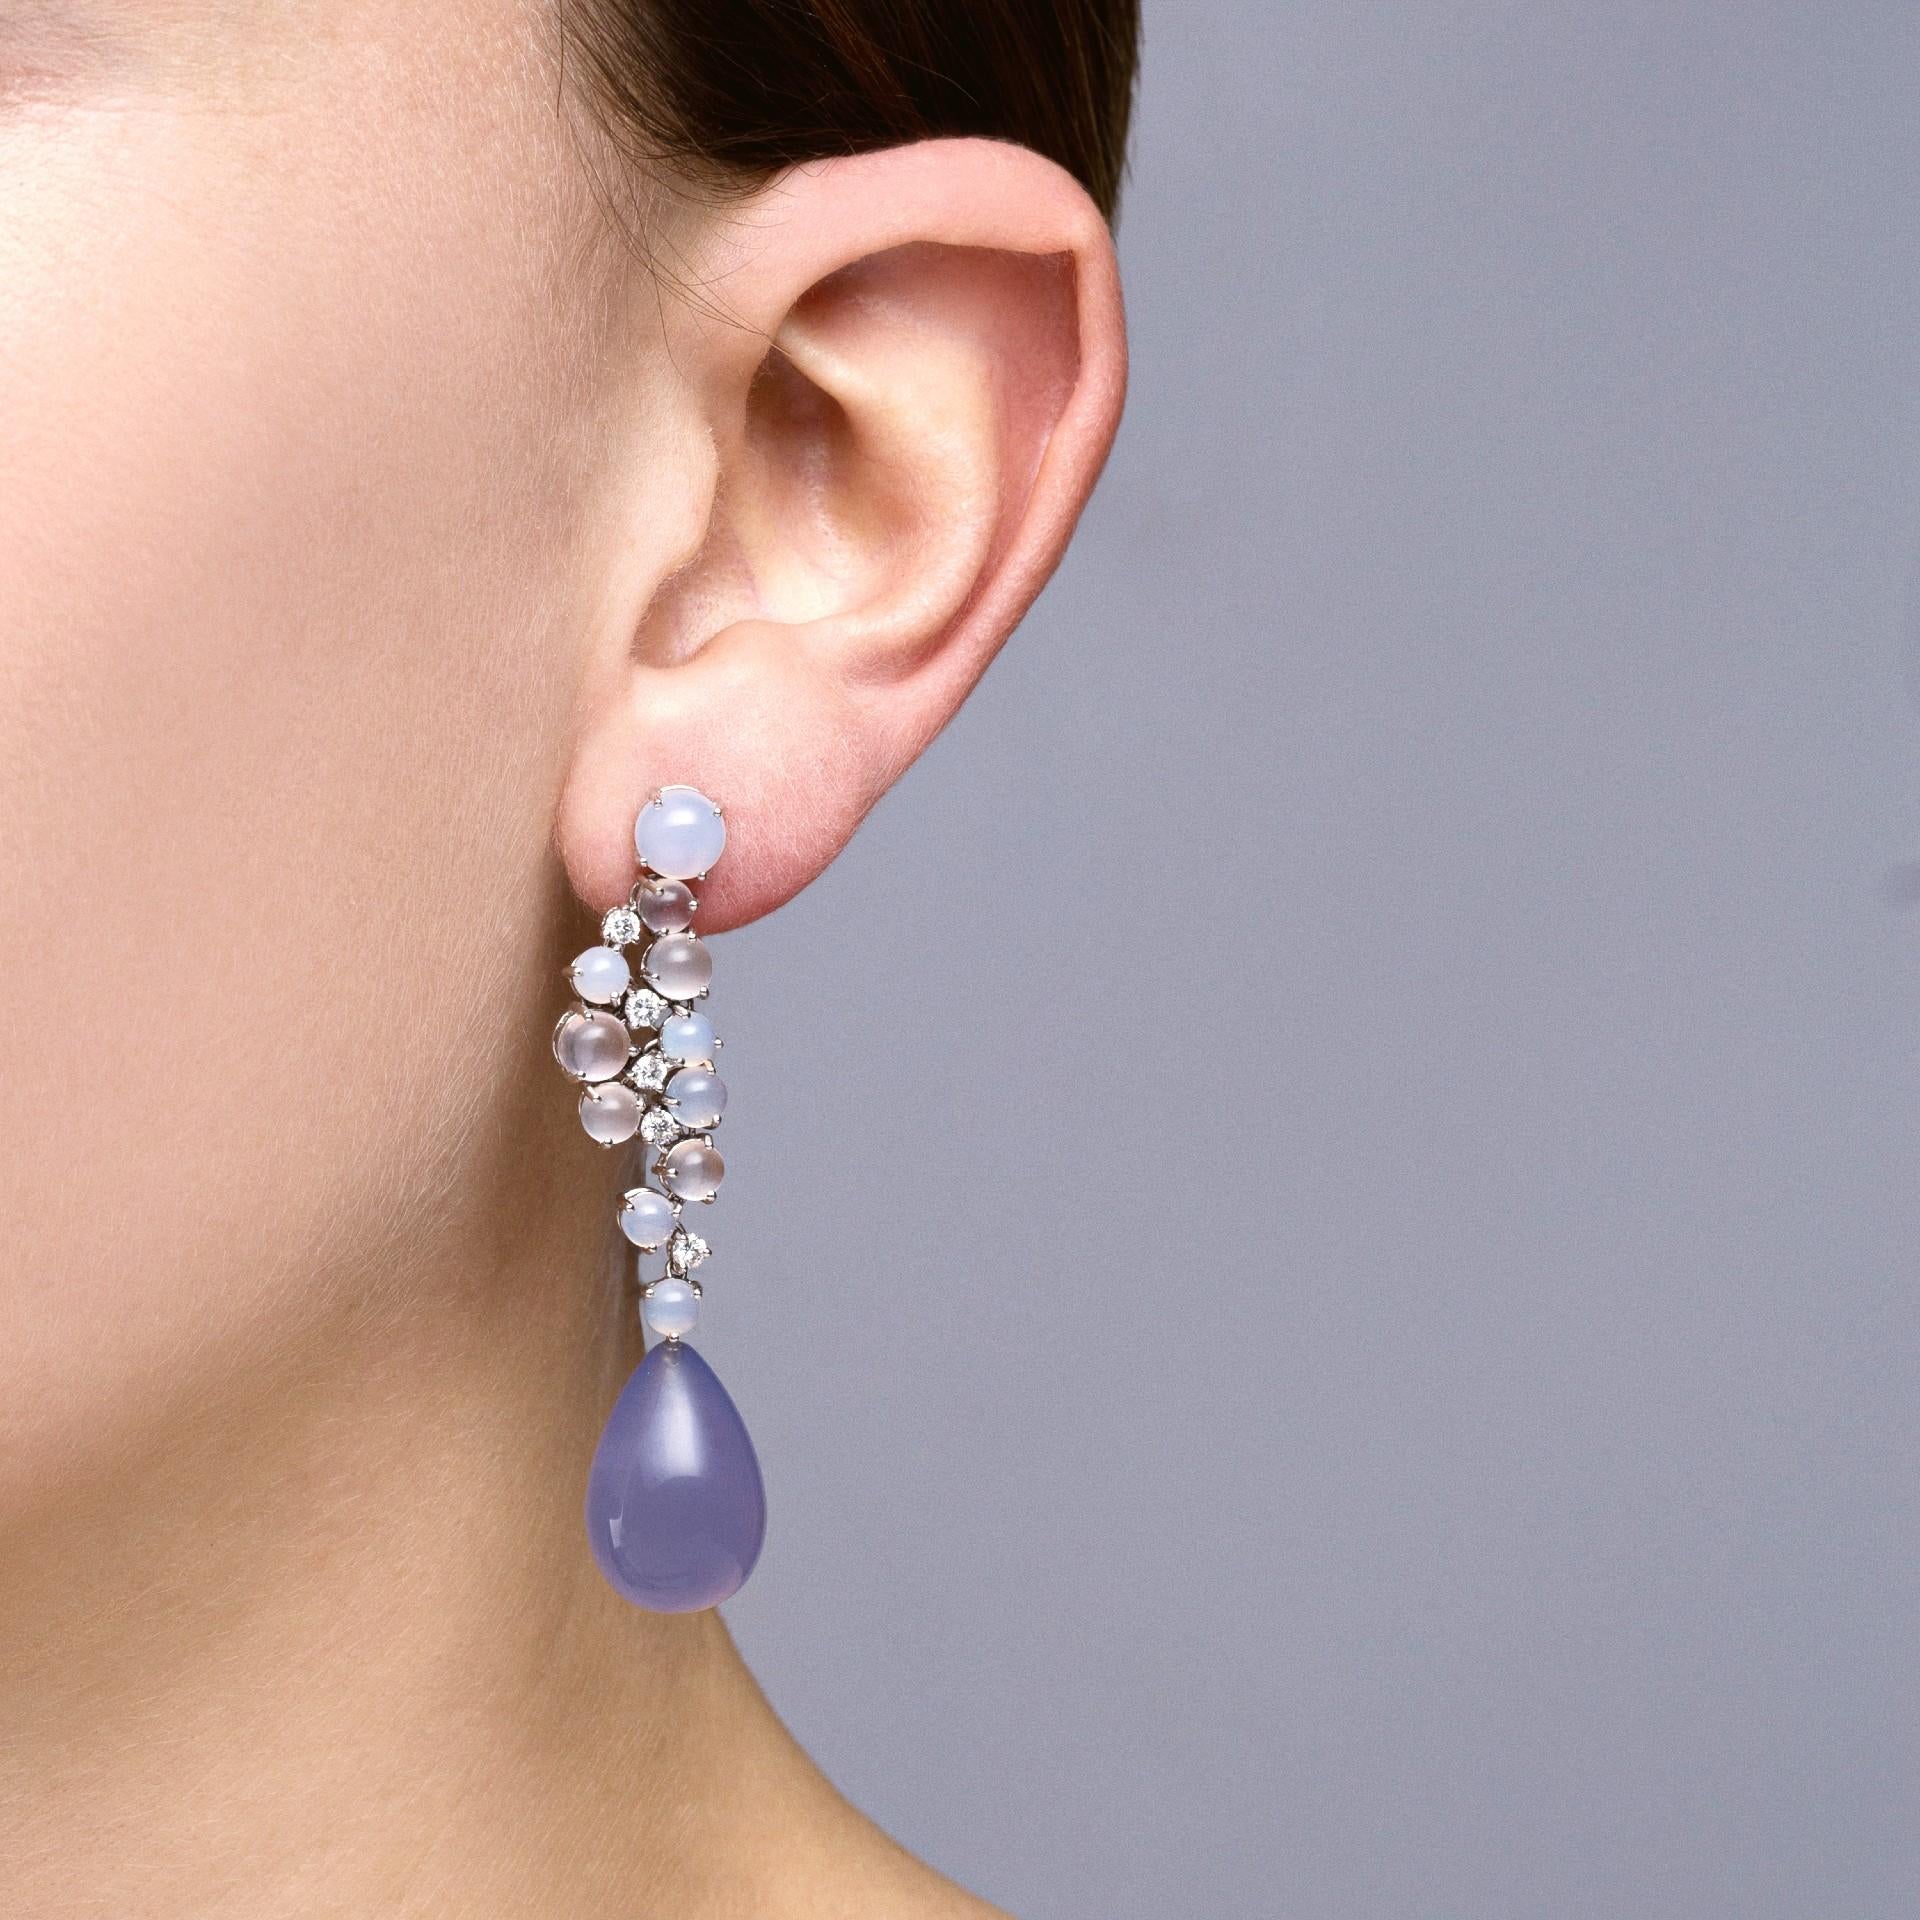 Alex Jona design collection, hand crafted in Italy, 18 karat white gold pair of drop earrings, featuring moonstone and chalcedony cabochons, 0.66 carats of white diamonds and a pair of pear shaped Namibian Chalcedony cabochon drops, weighing 50.89